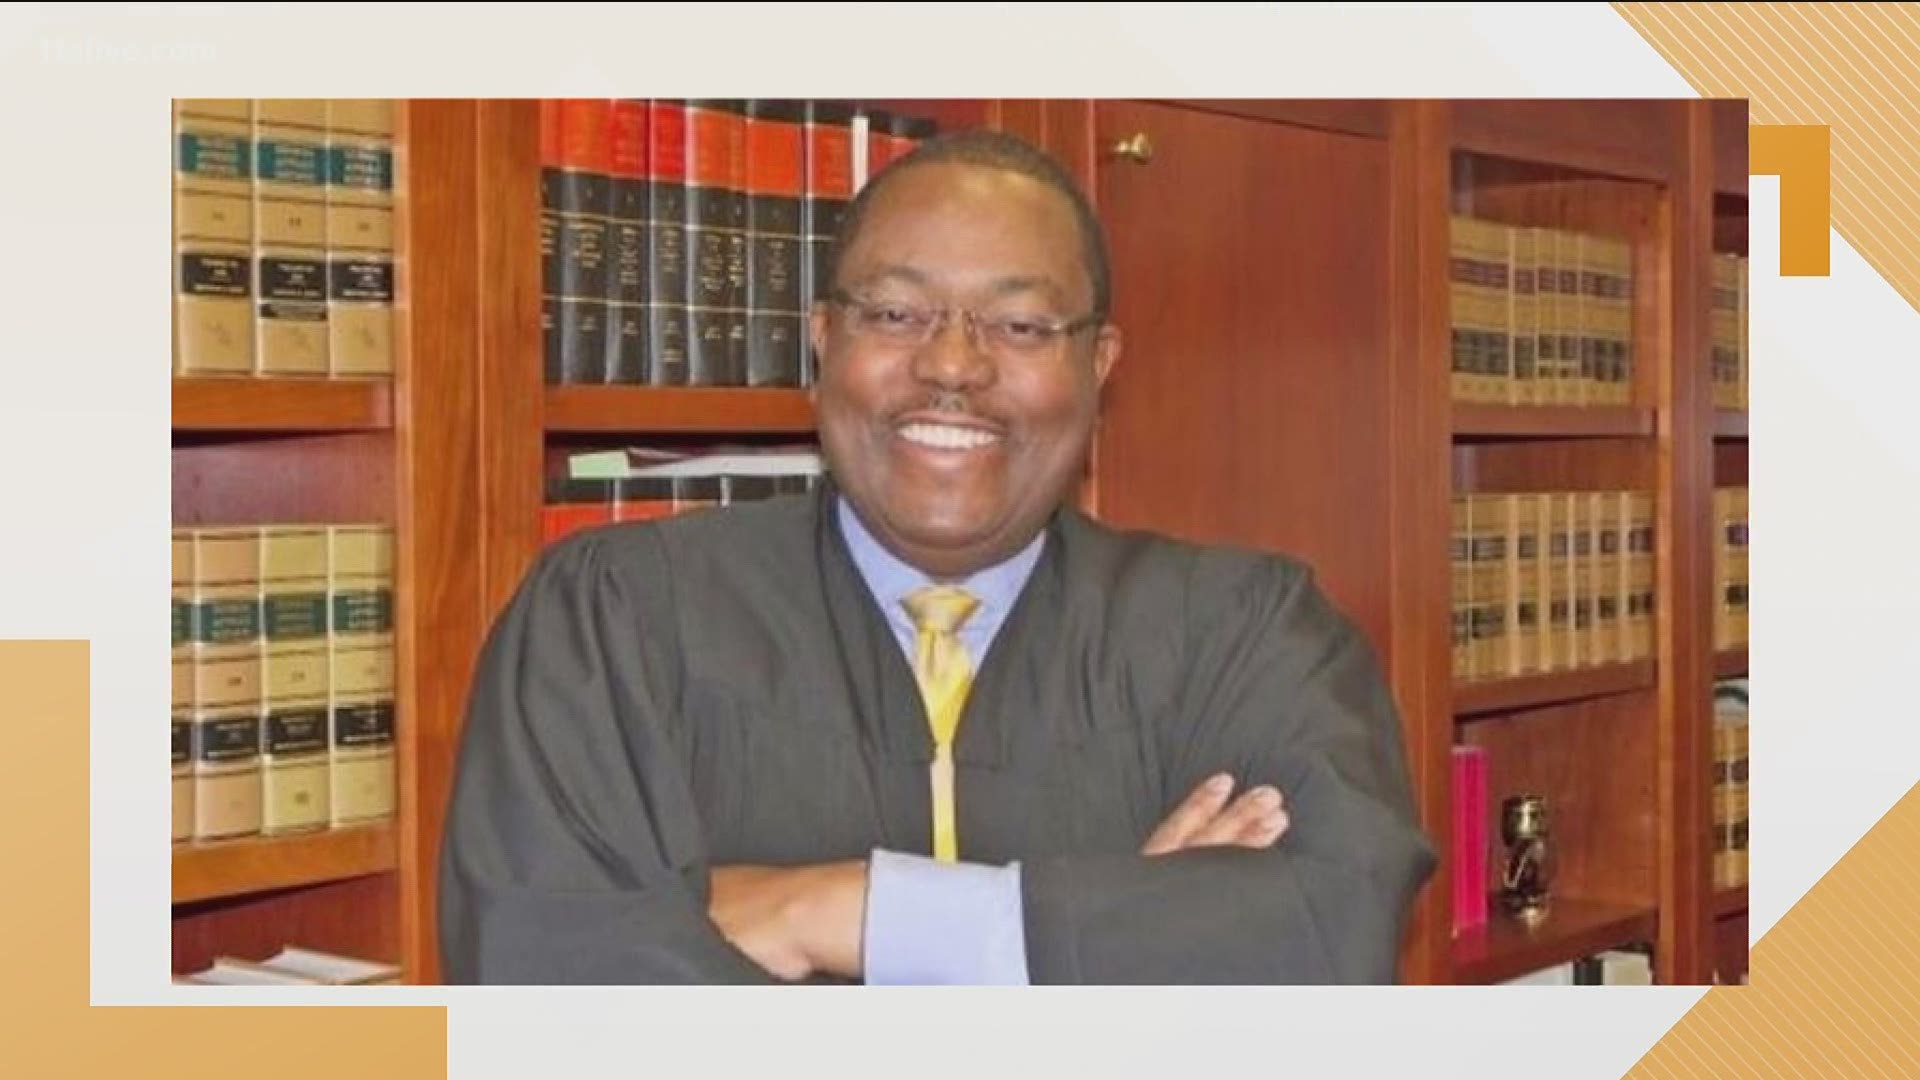 The first Black superior court judge on the Alcovy Circuit died unexpectedly this month.